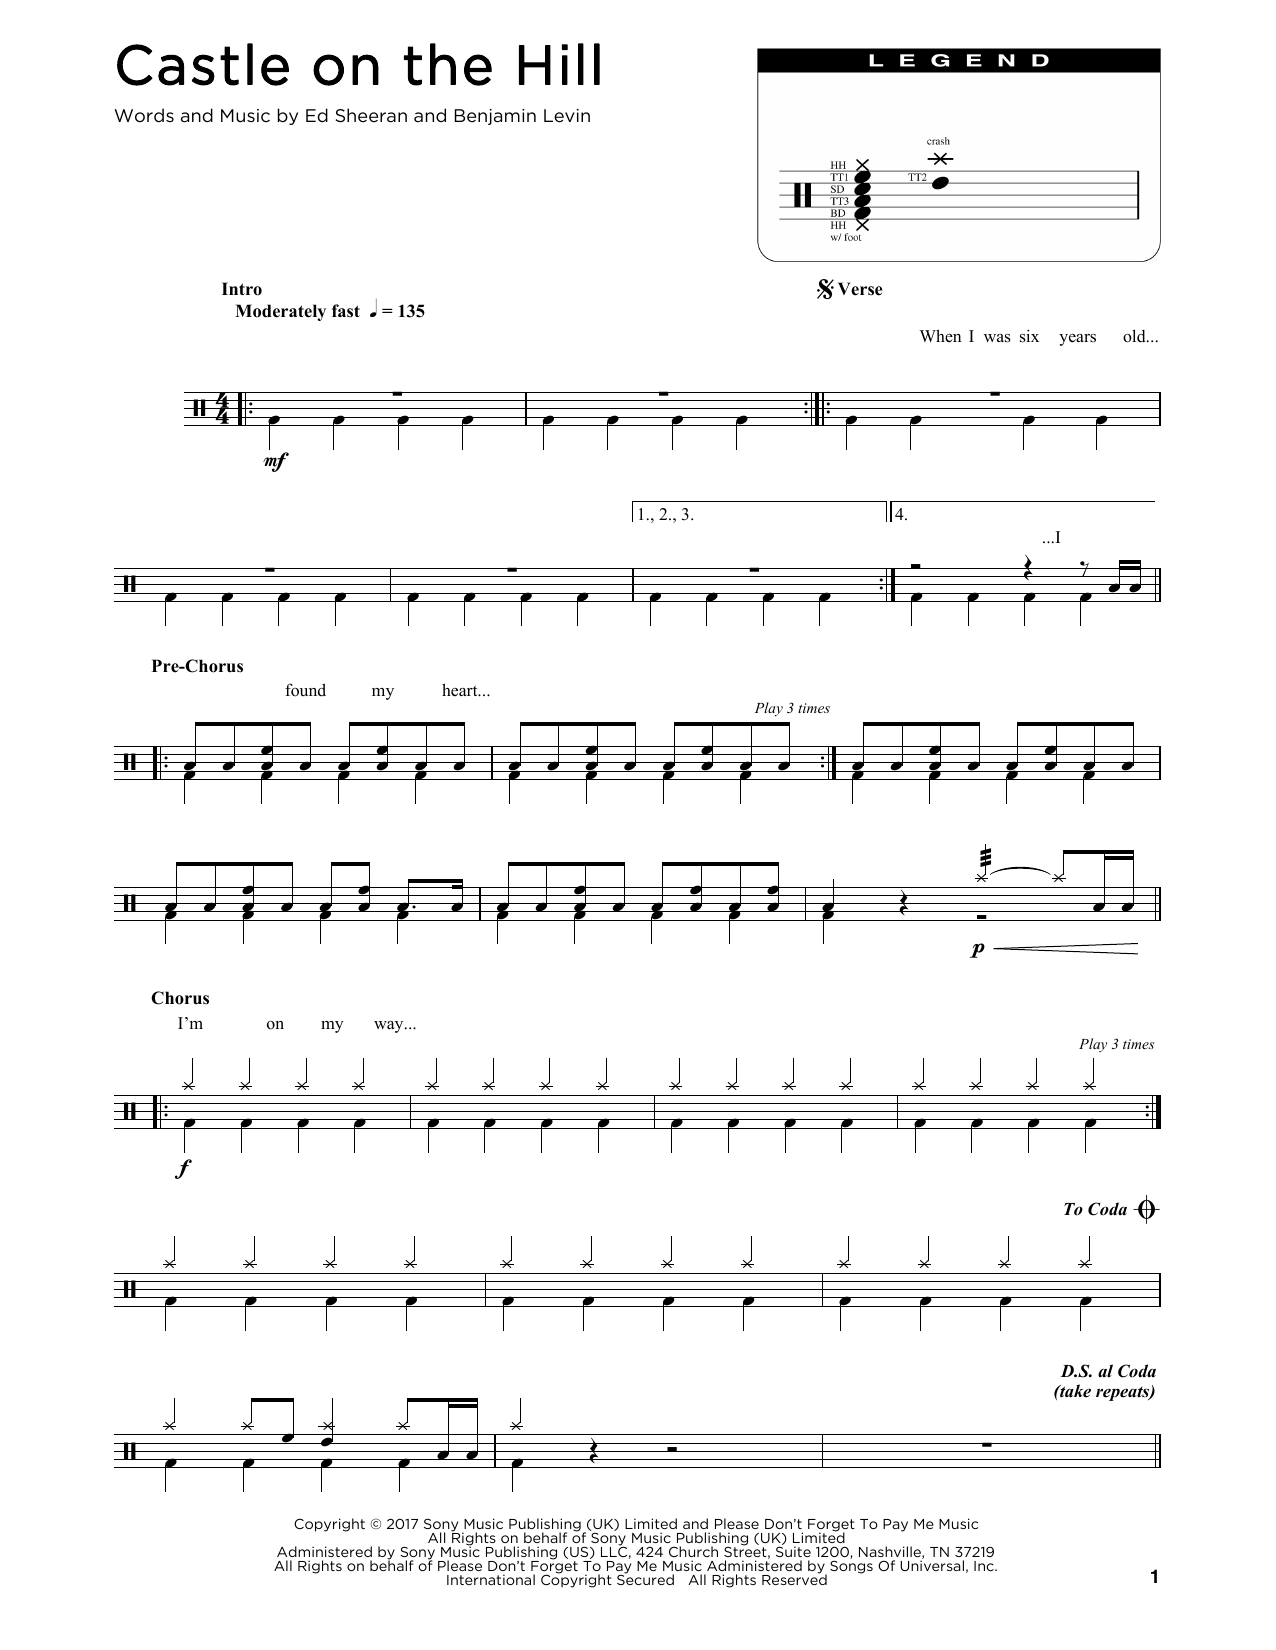 Download Ed Sheeran Castle On The Hill Sheet Music